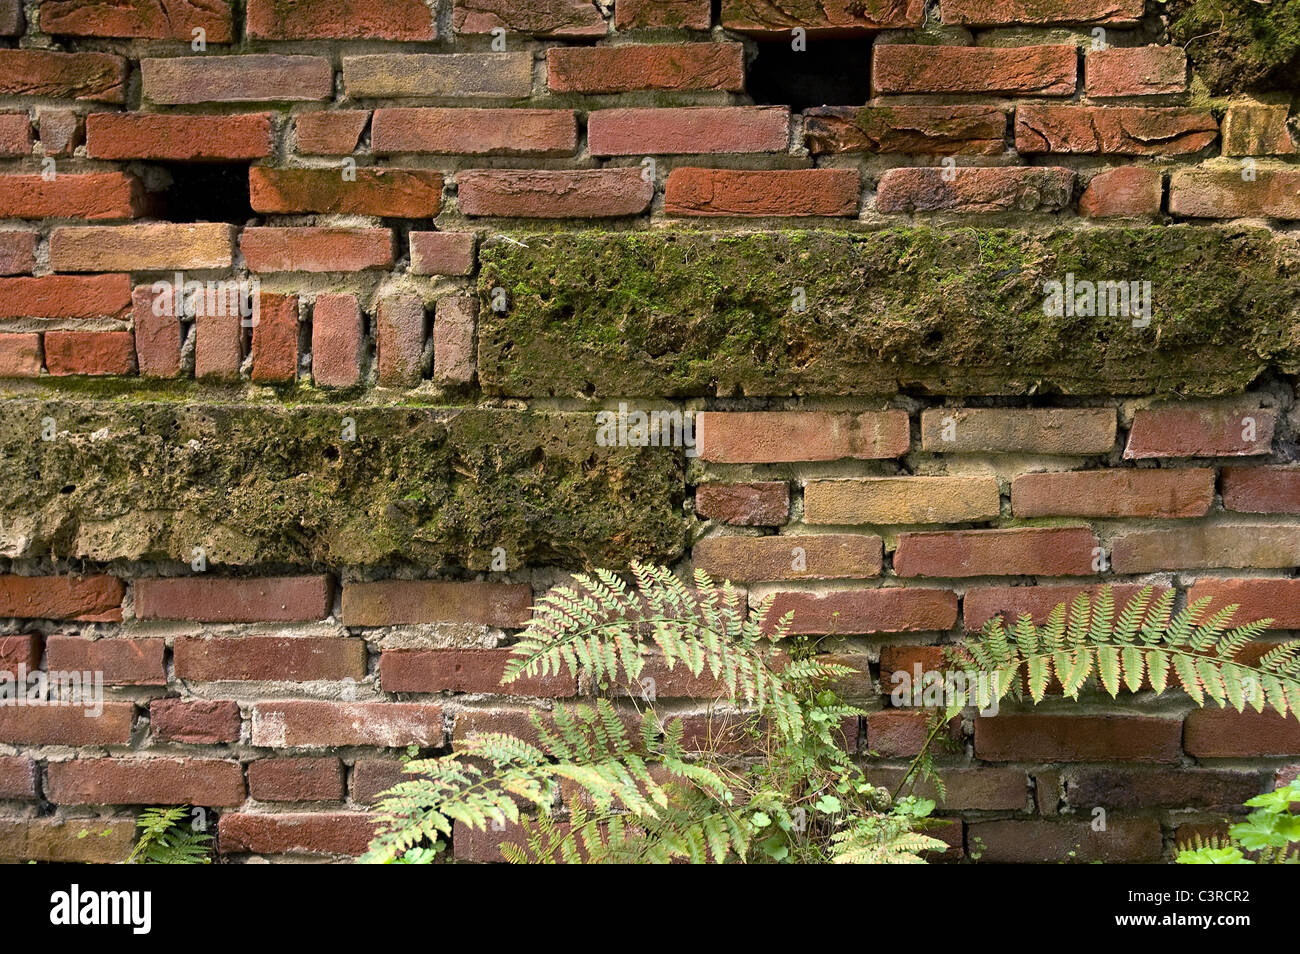 Old stone wall with brown bricks. The wall is covered with moss and some fern are in front of it. Stock Photo